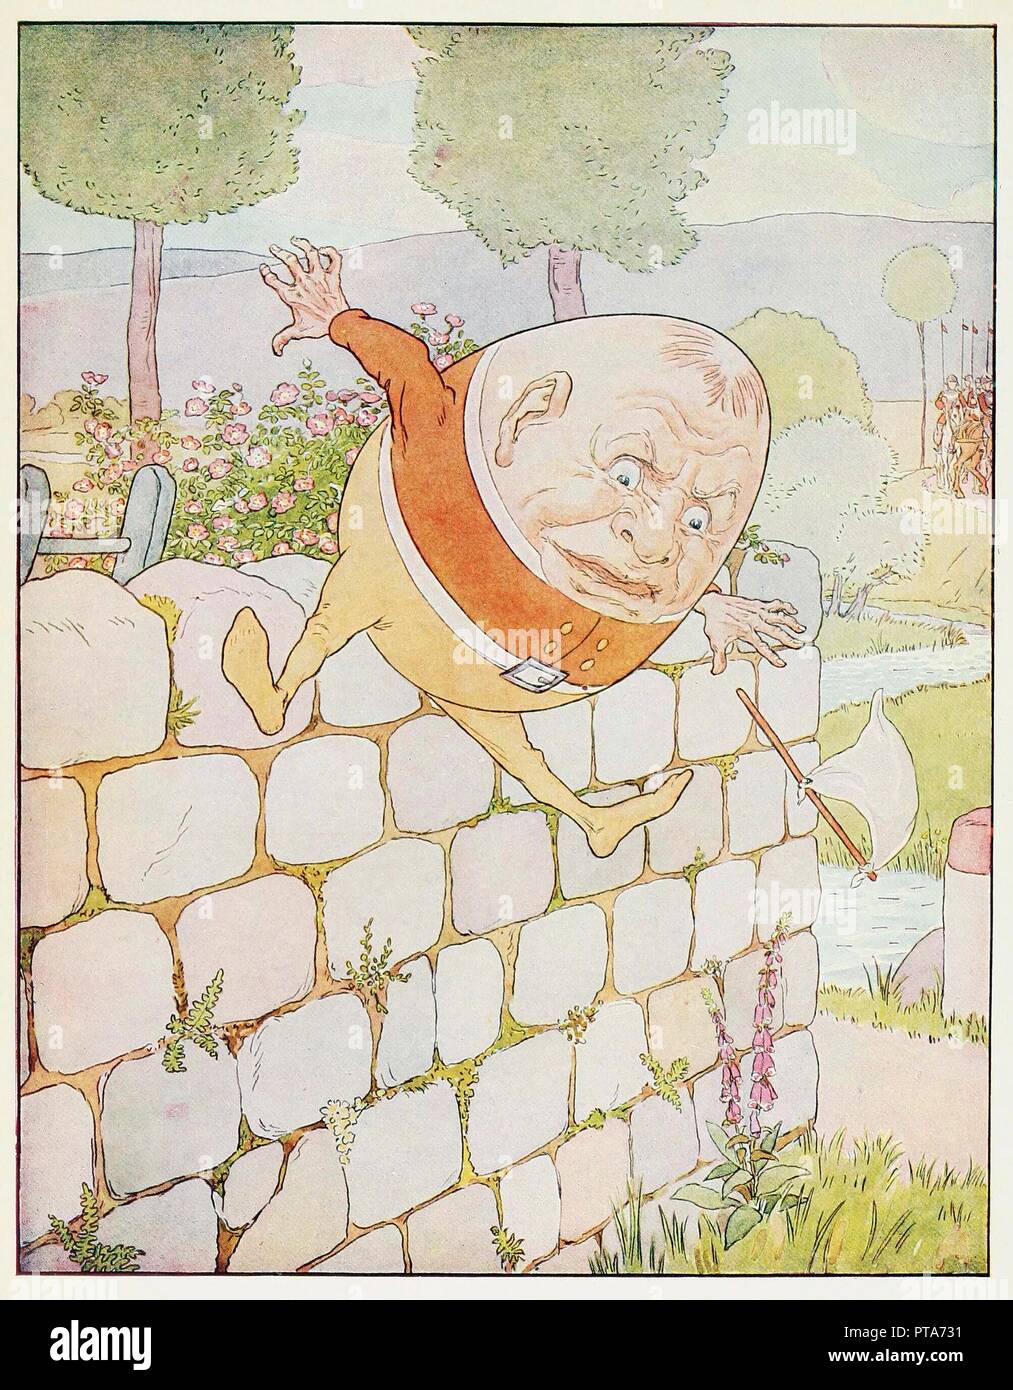 Humpty Dumpty had a great fall, from A Nursery Rhyme Picture Book, pub. 1914. Creator: Leonard Leslie Brooke (1862 - 1940). Stock Photo